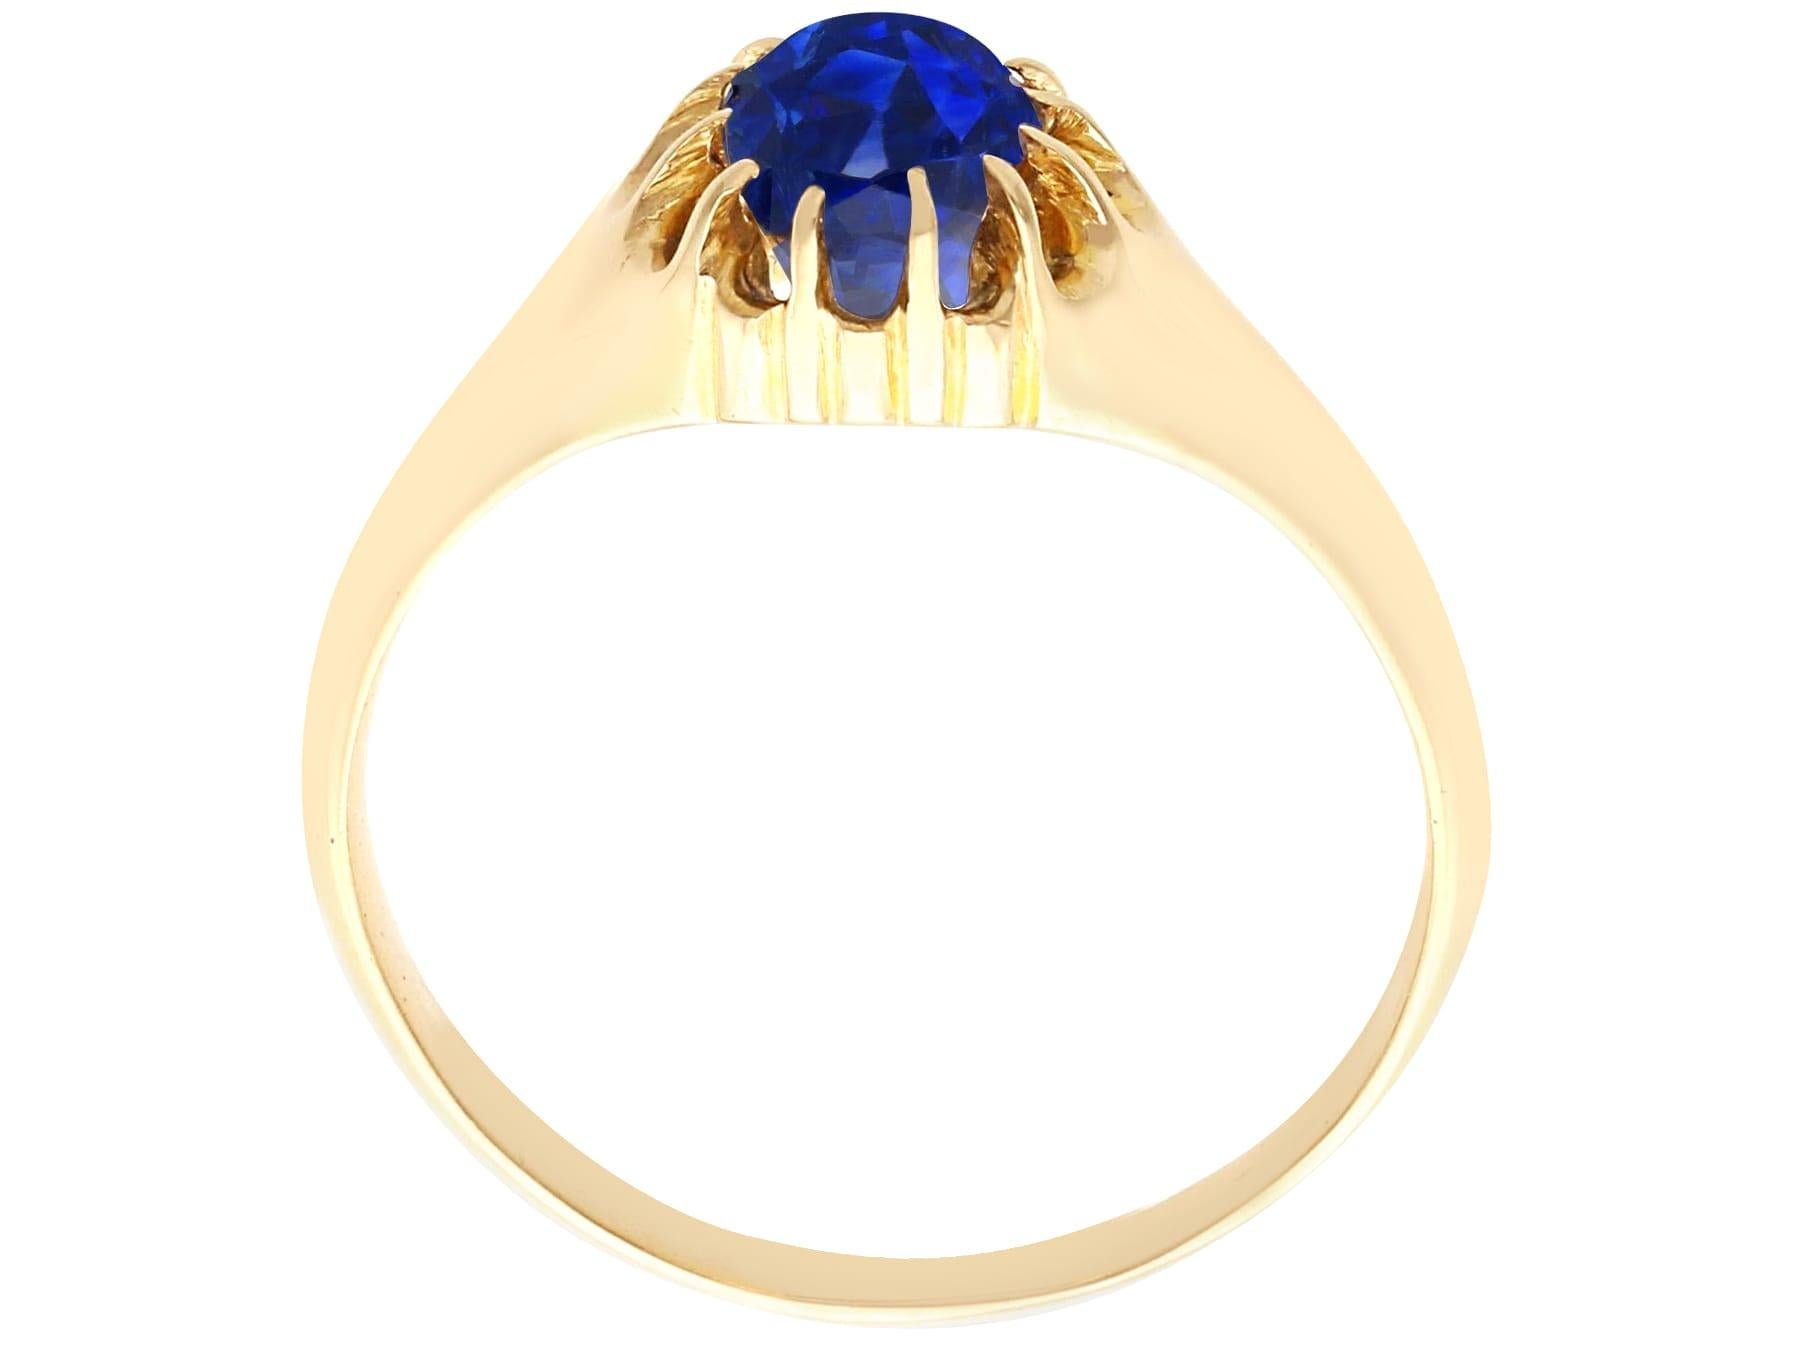 Women's or Men's Antique 1.42 Carat Basaltic Sapphire and 14k Yellow Gold Ring, circa 1910 For Sale